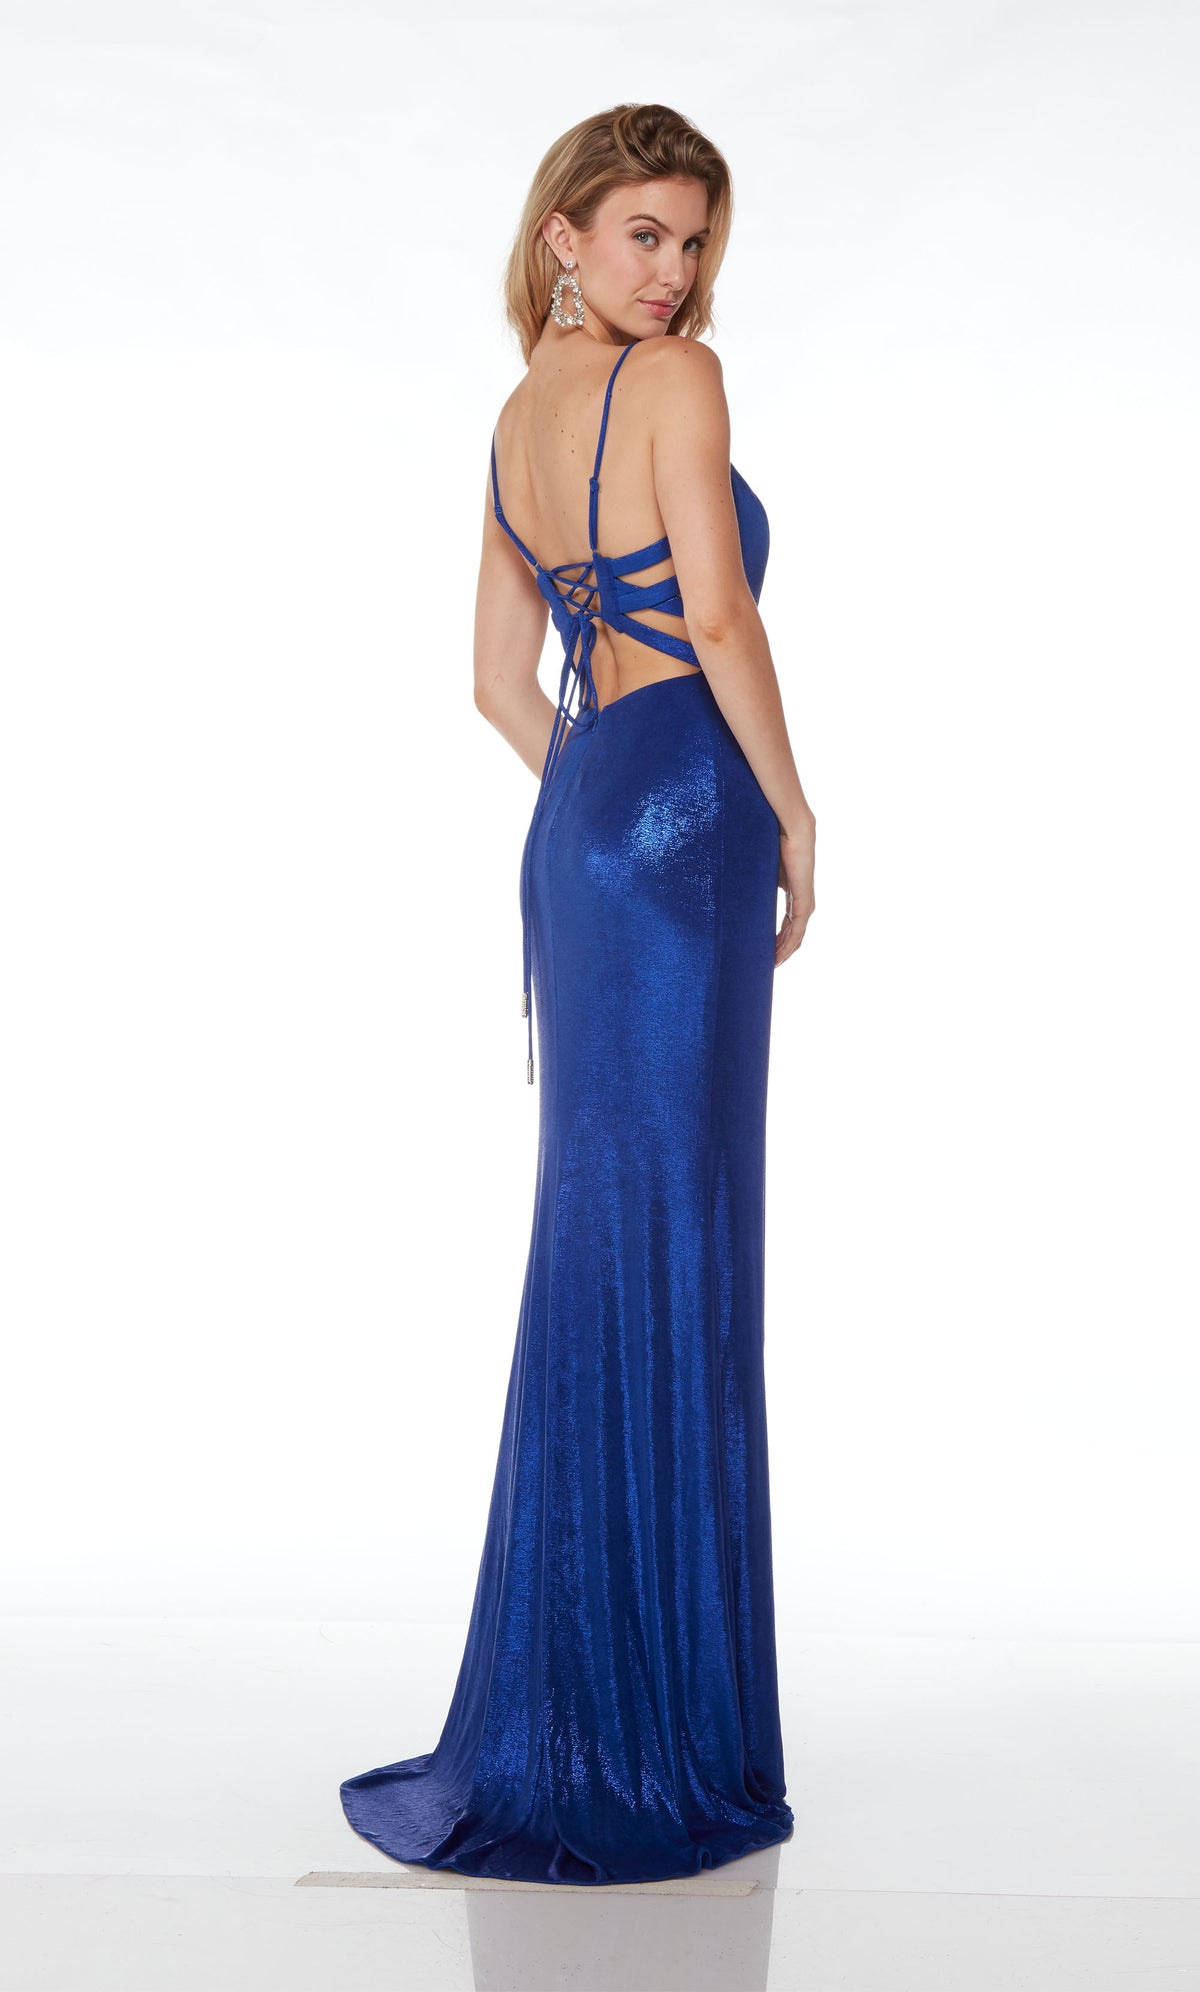 Elegant royal blue metallic stretch formal dress with an plunging neckline, side slit, lace-up back, and an graceful train for an stylish and sophisticated look.